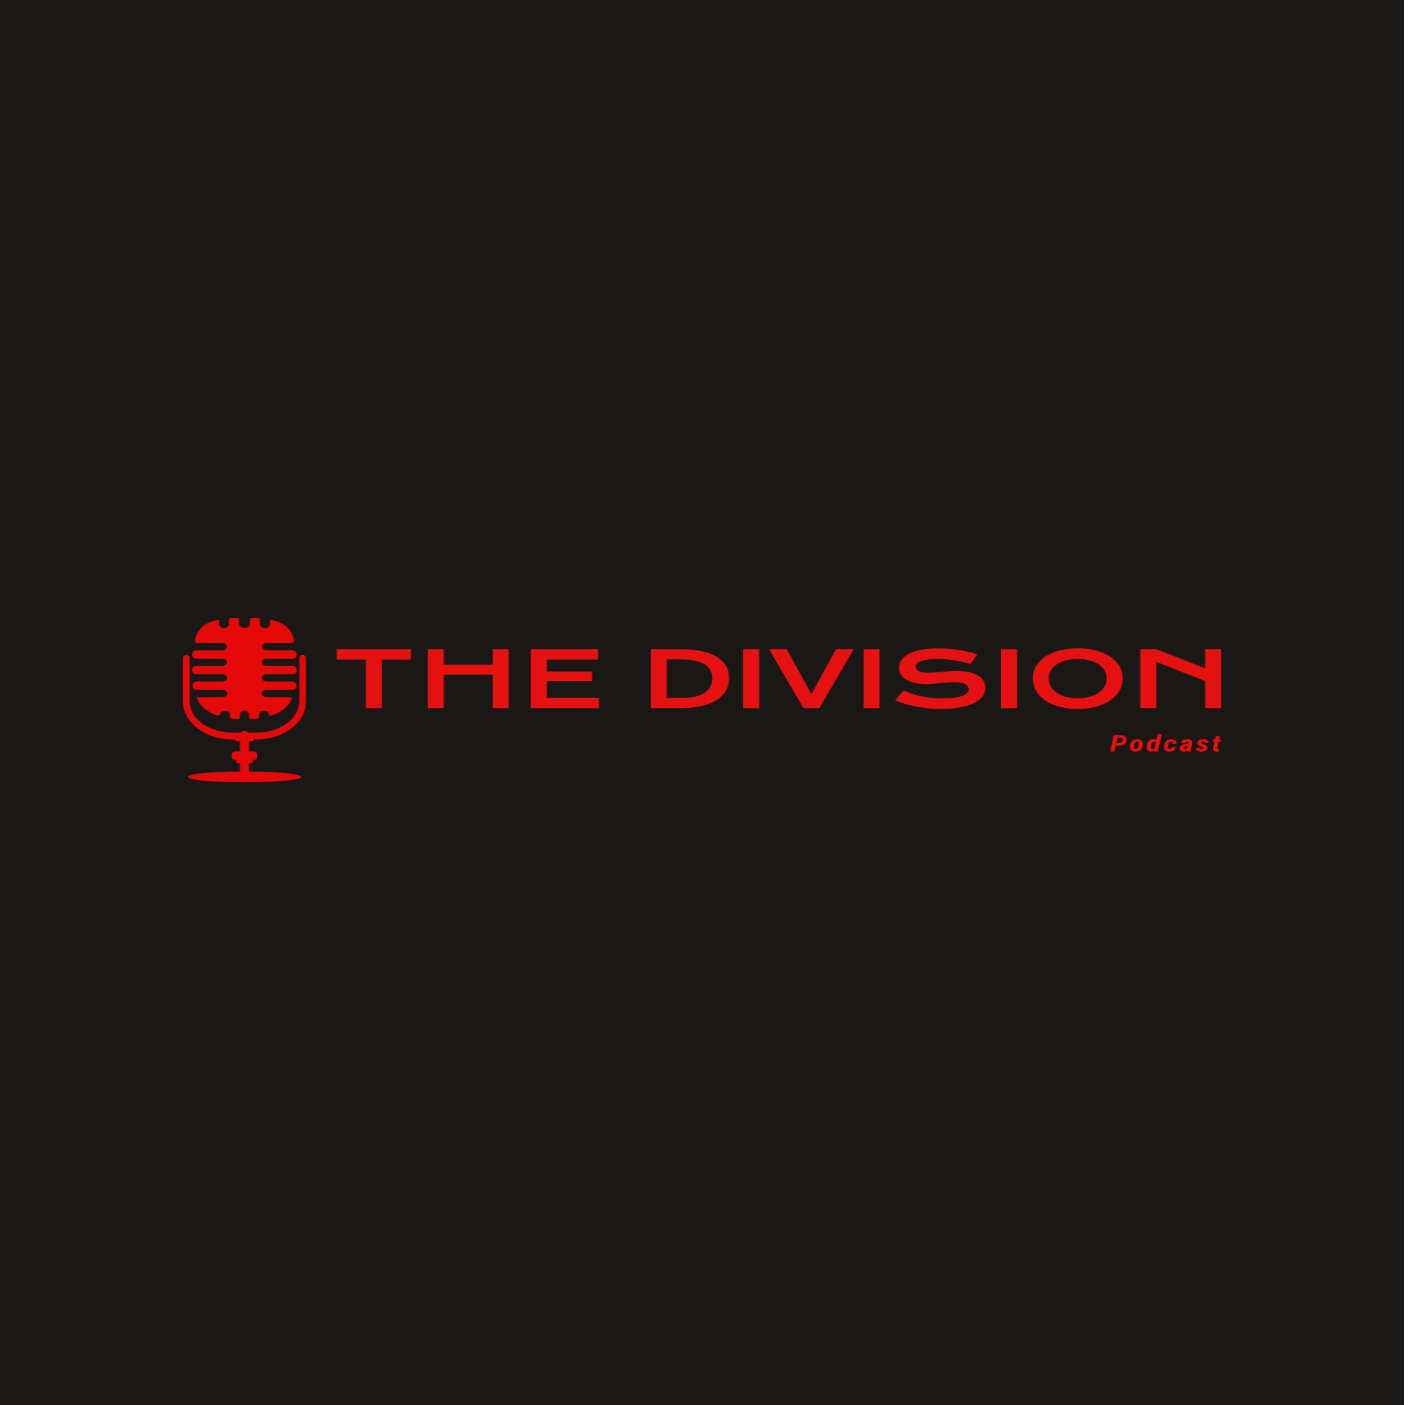 The Division Podcast